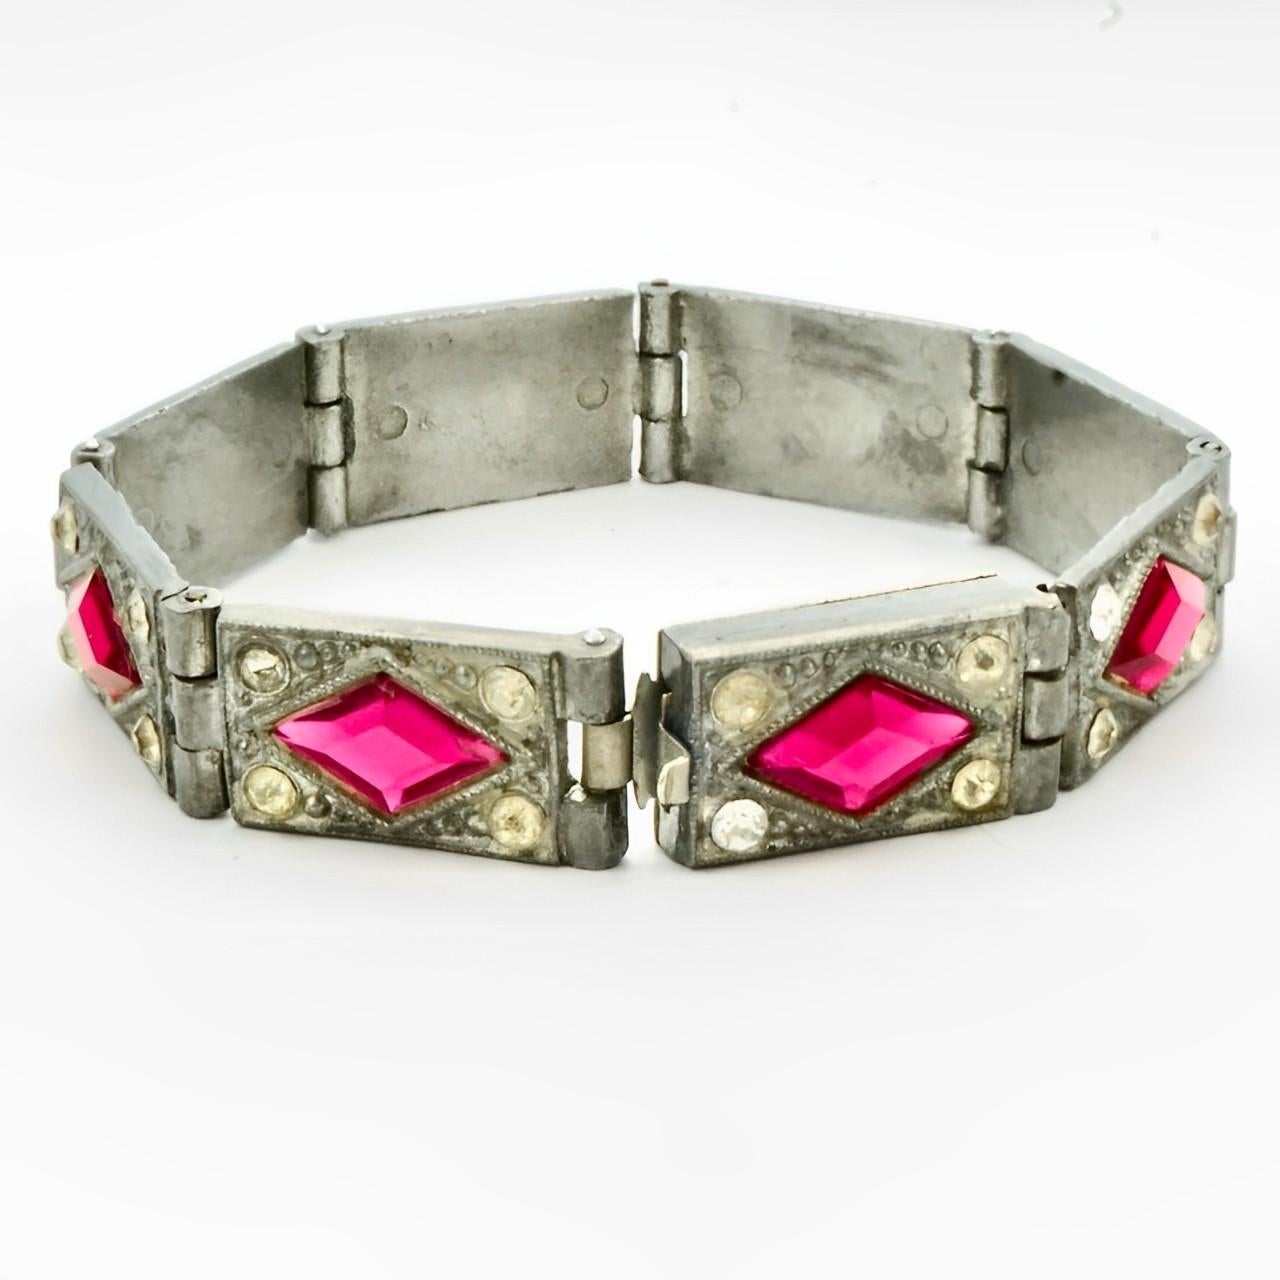 Women's or Men's Art Deco Silver Tone Pink and Clear Rhinestone Ornate Link Bracelet circa 1930s